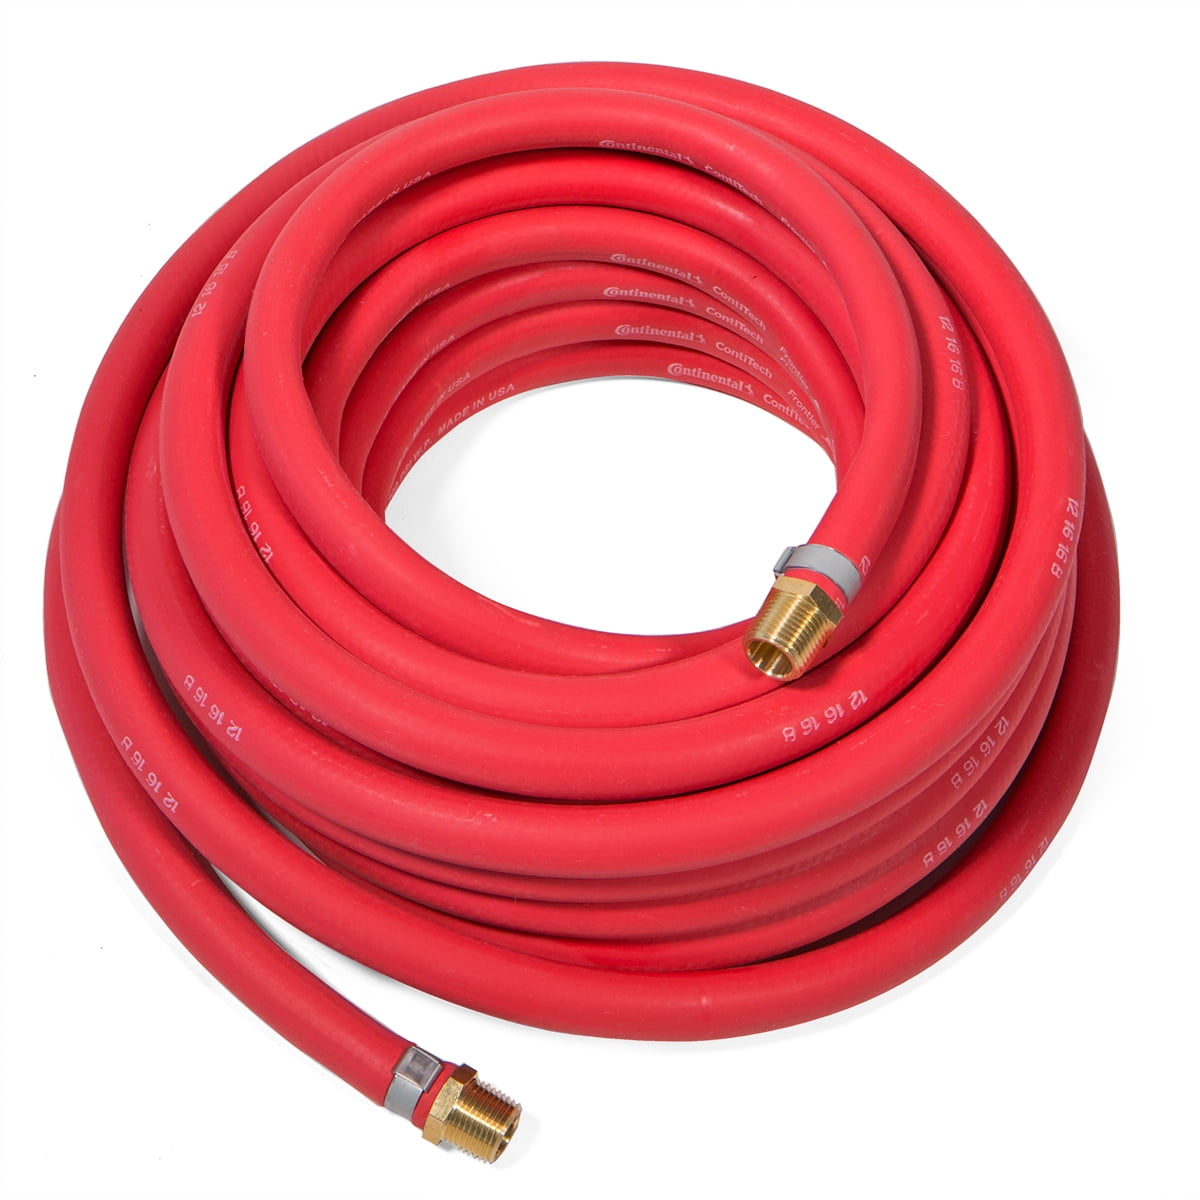 USA Made Continental Rubber 1/4 Inch 5 Foot Pigtail Air Hose Whip Oil Resistant 